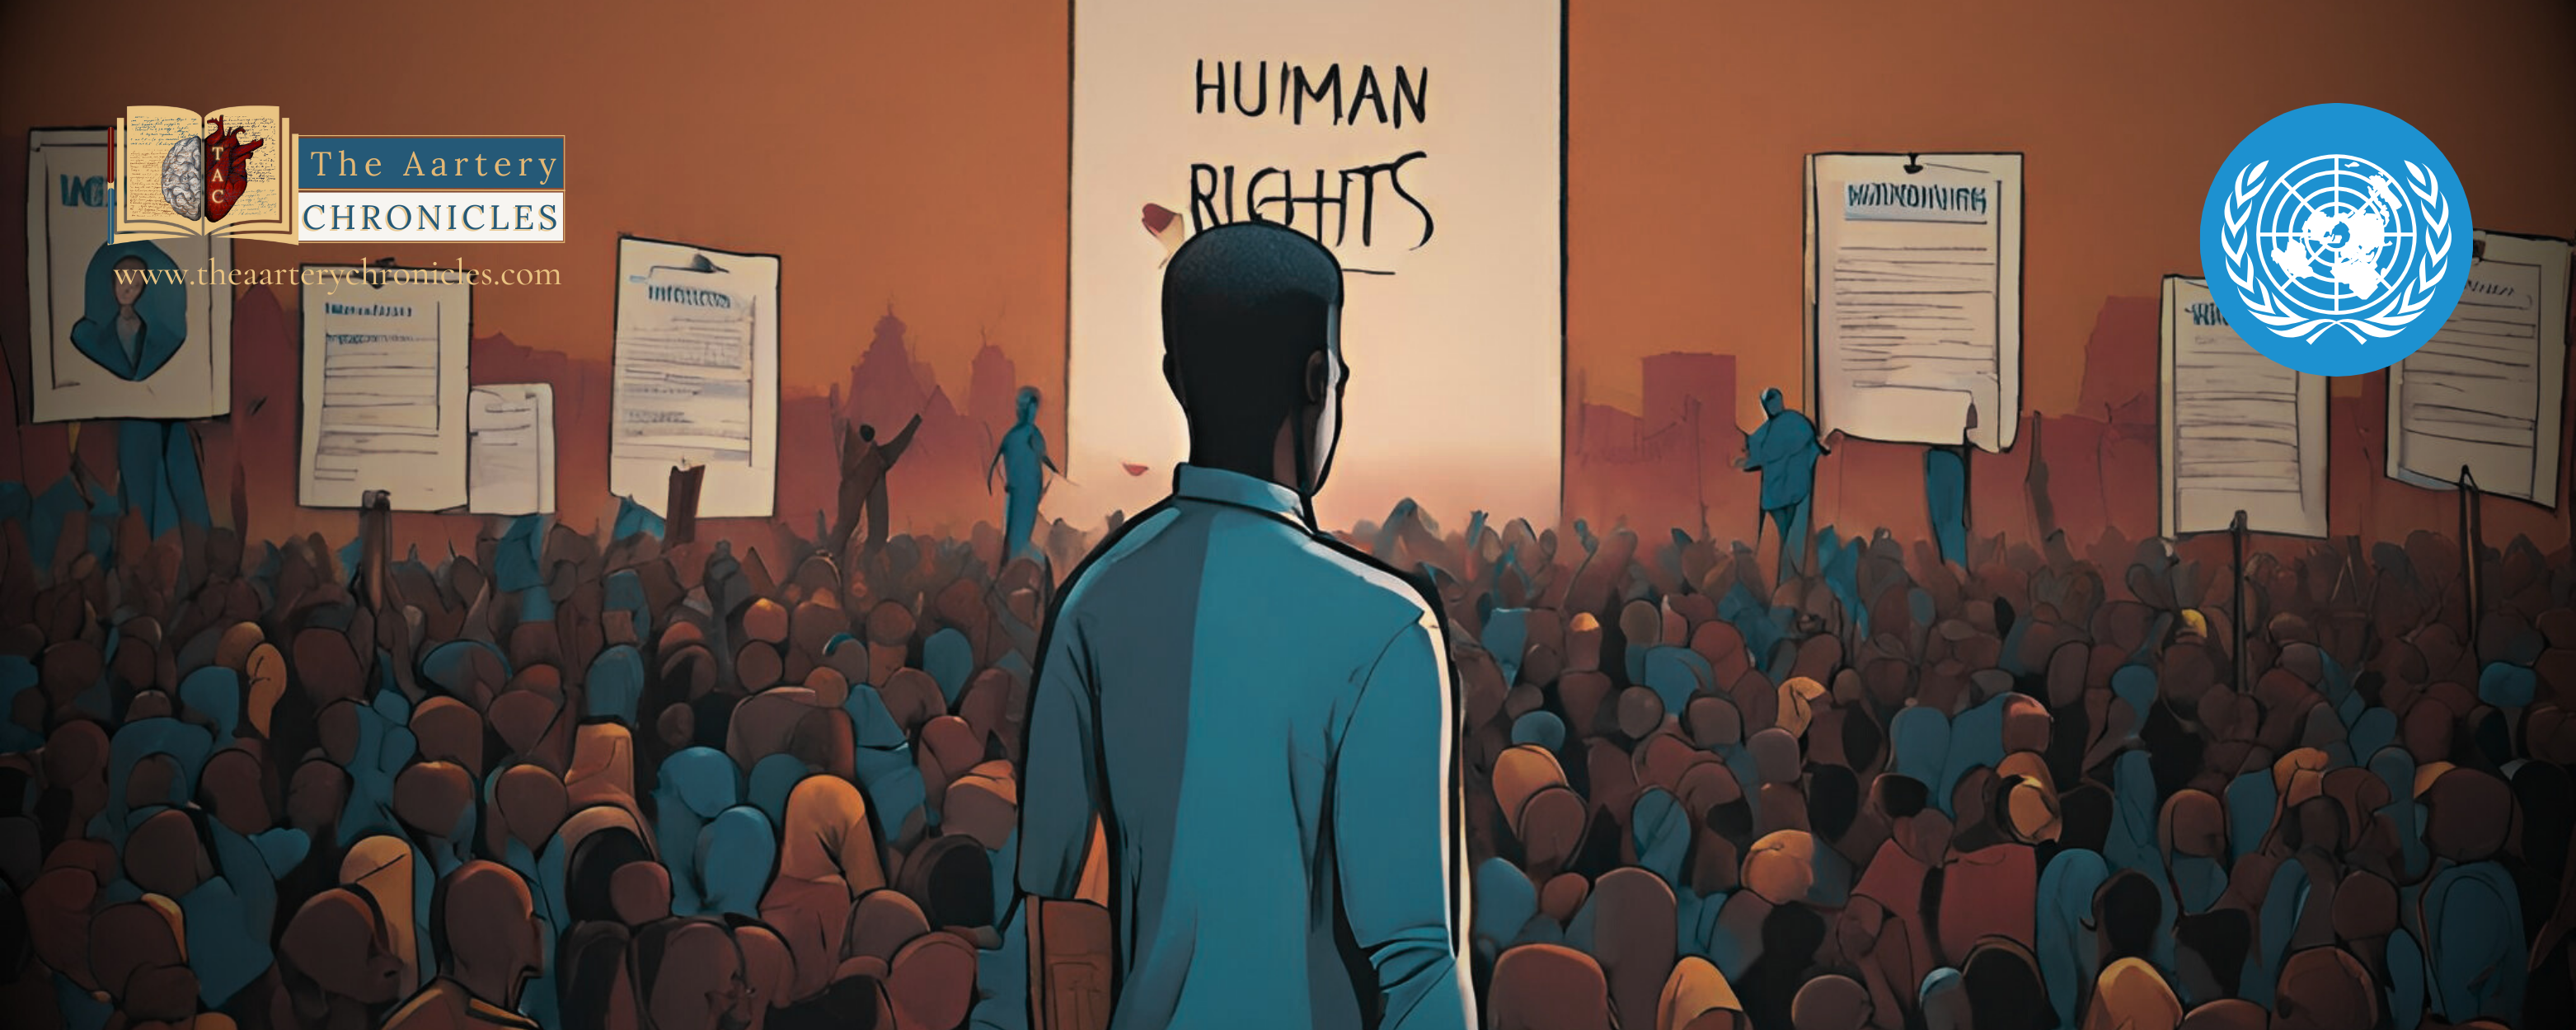 Human Rights: Celebrating 75 years